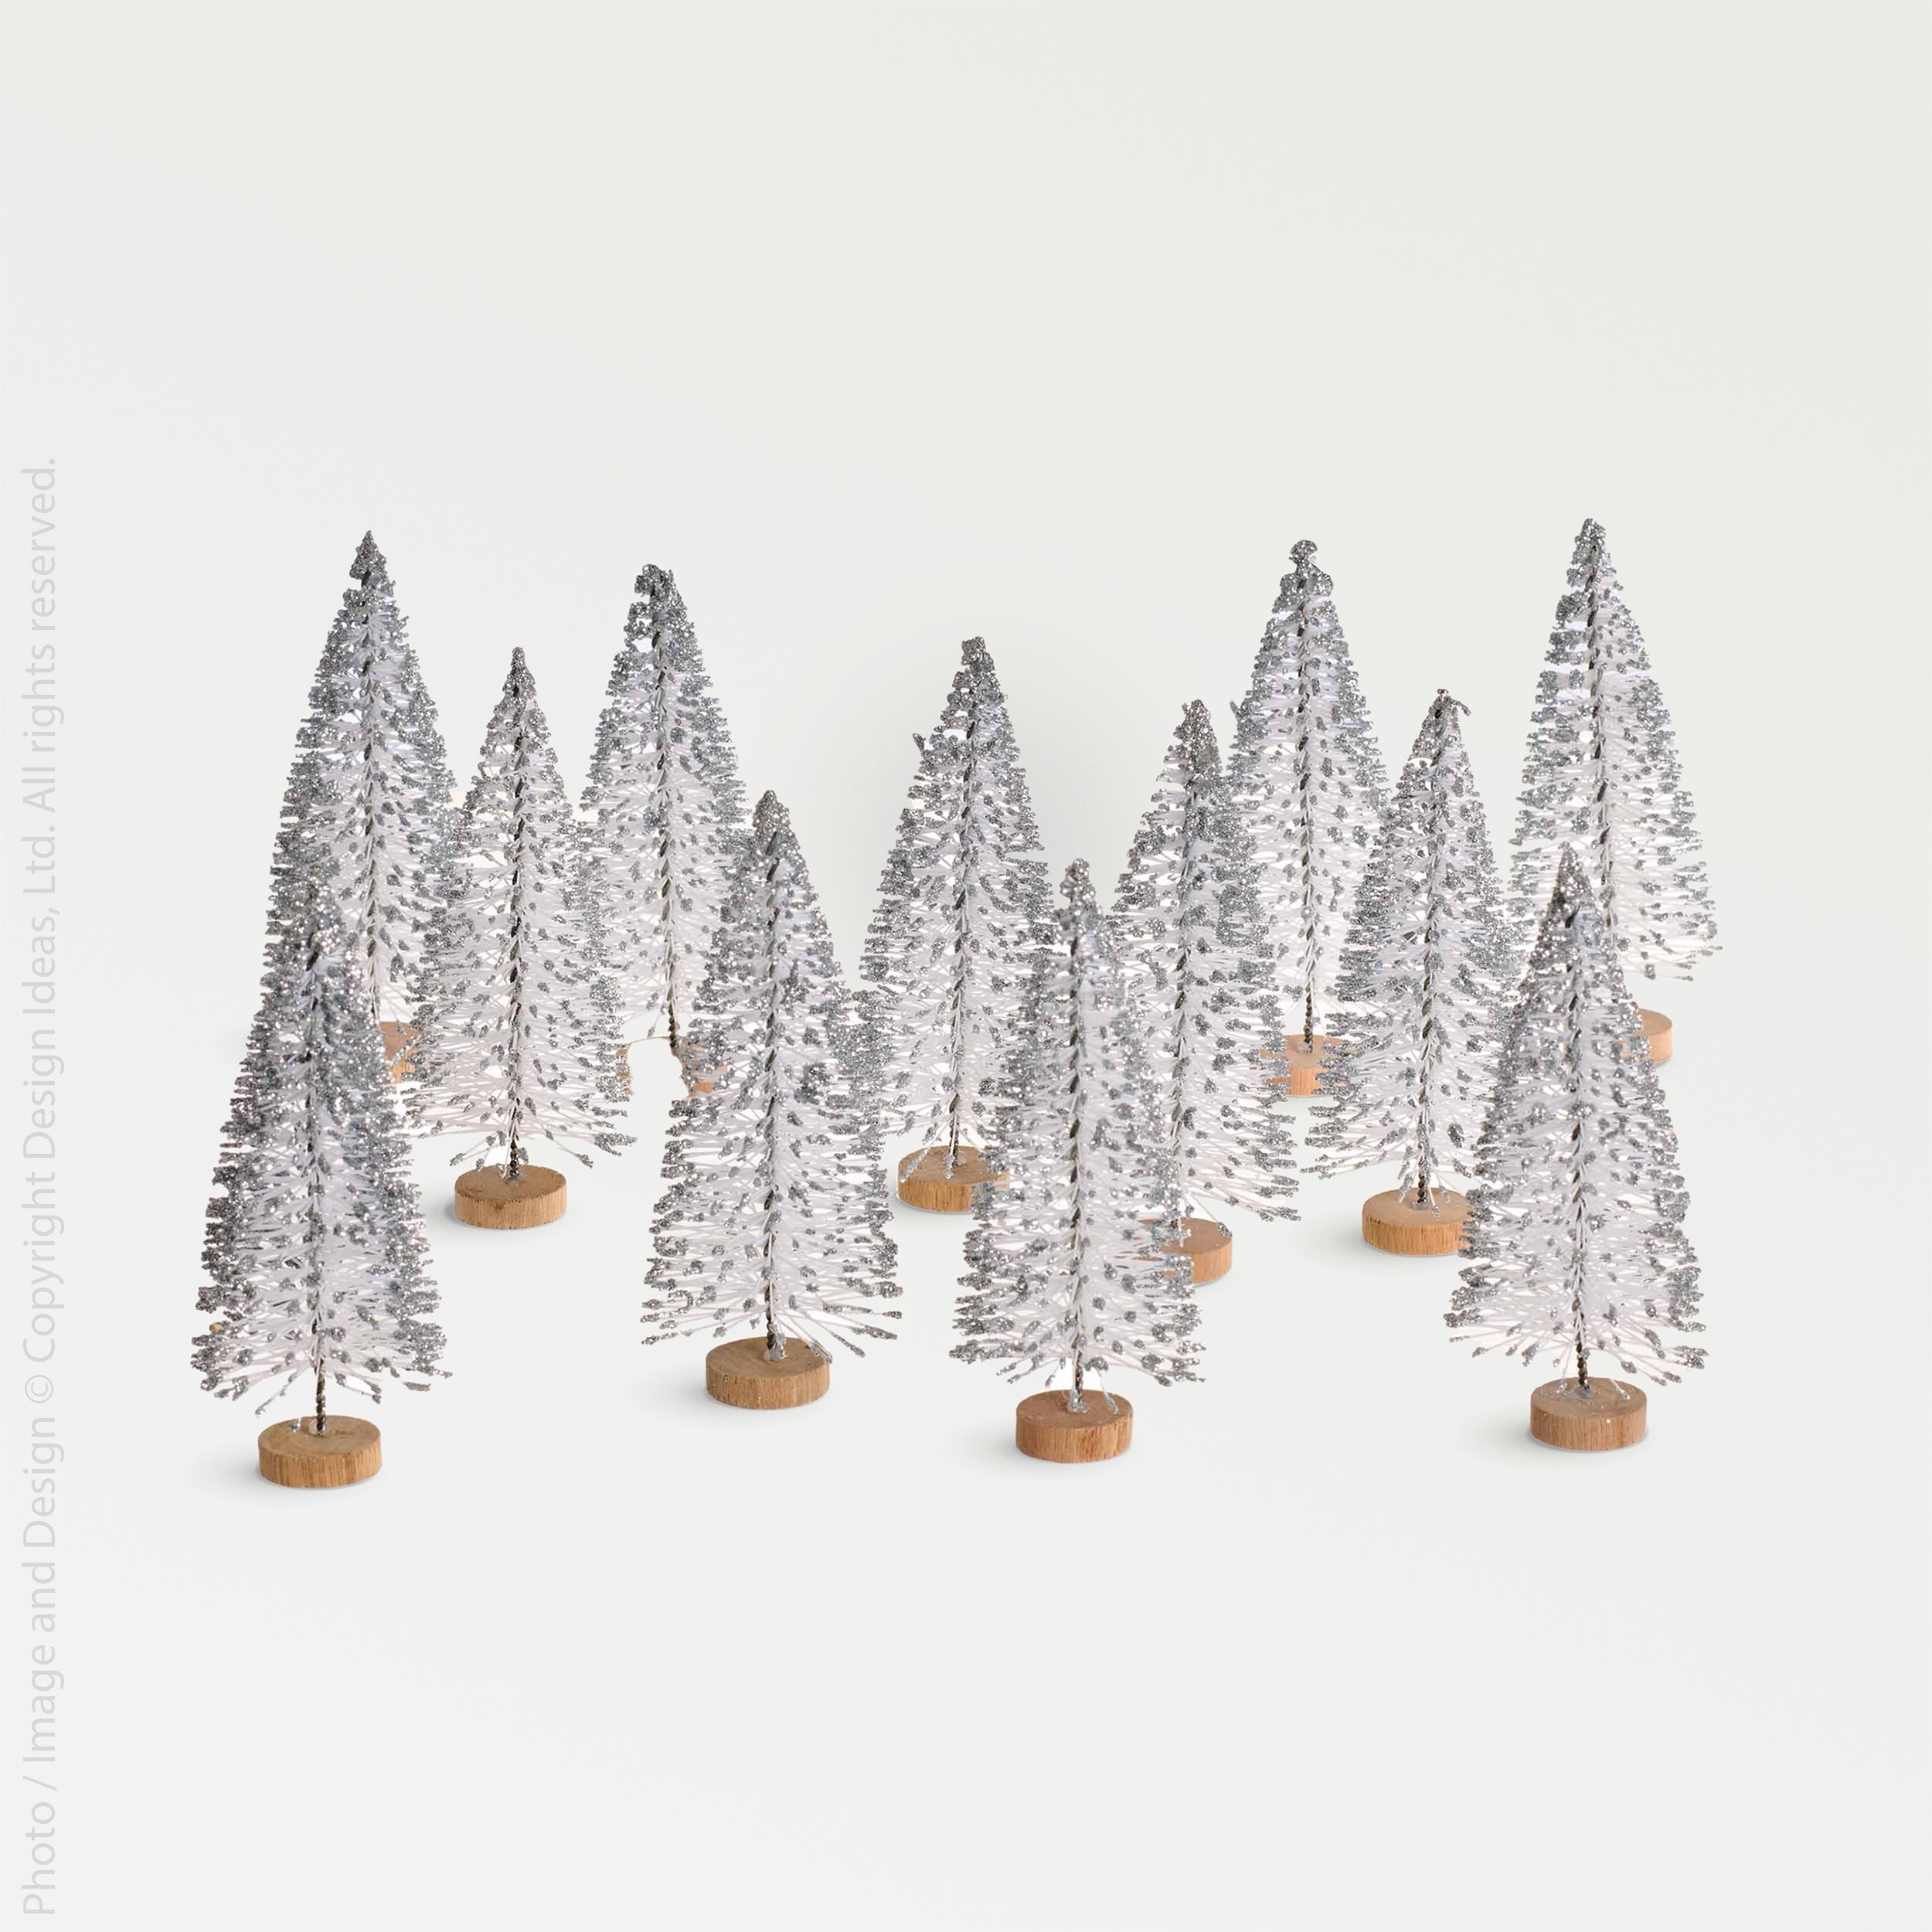 Yukon™ trees, white and silver glitter, set of 12 - White | Image 1 | Premium Decorative from the Yukon collection | made with Steel Wire for long lasting use | texxture